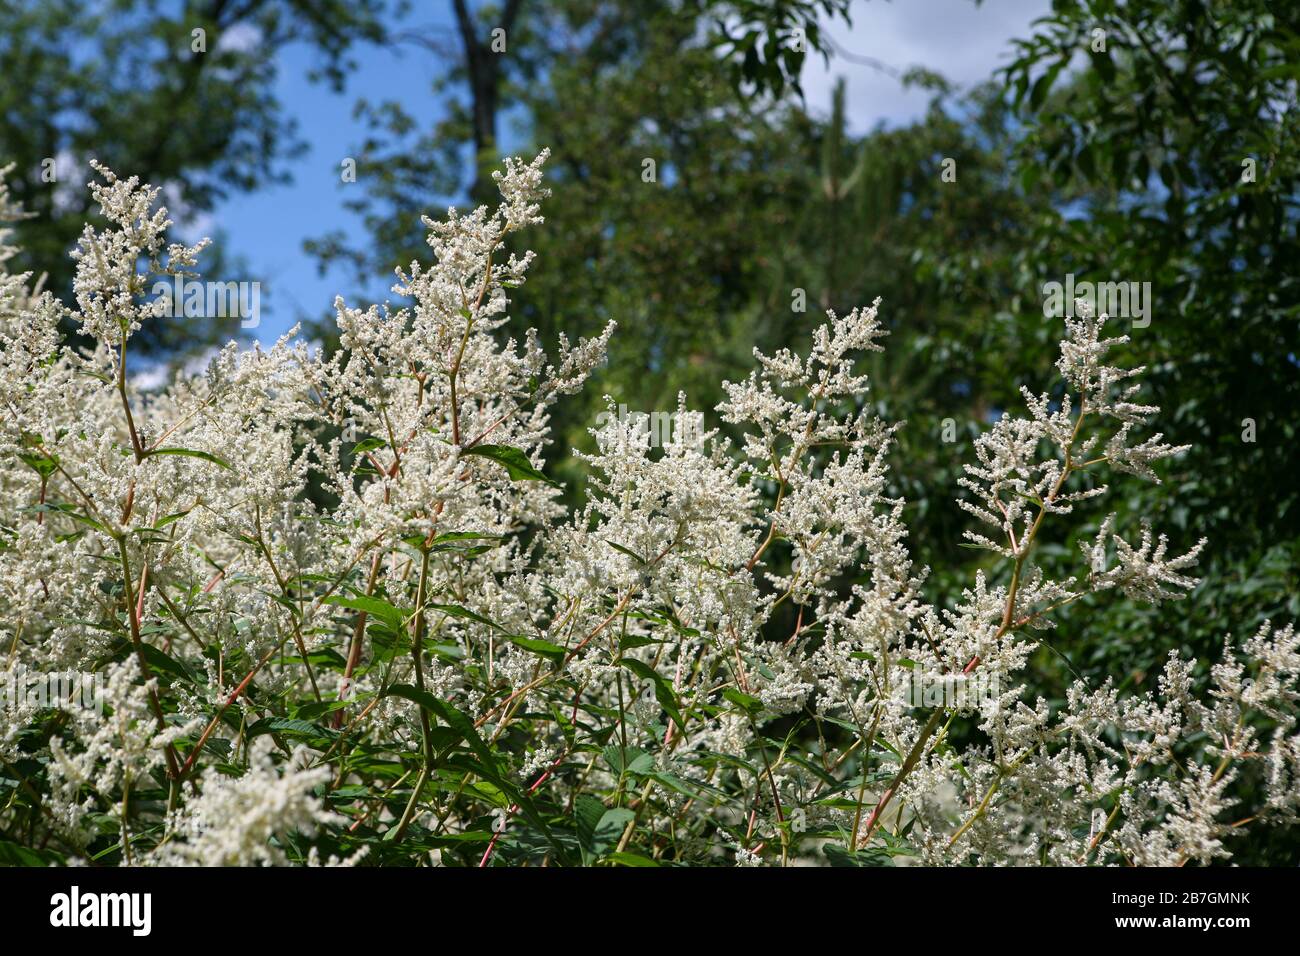 Persicaria polymorpha in flower - tall perennial with masses of small white flowers Stock Photo